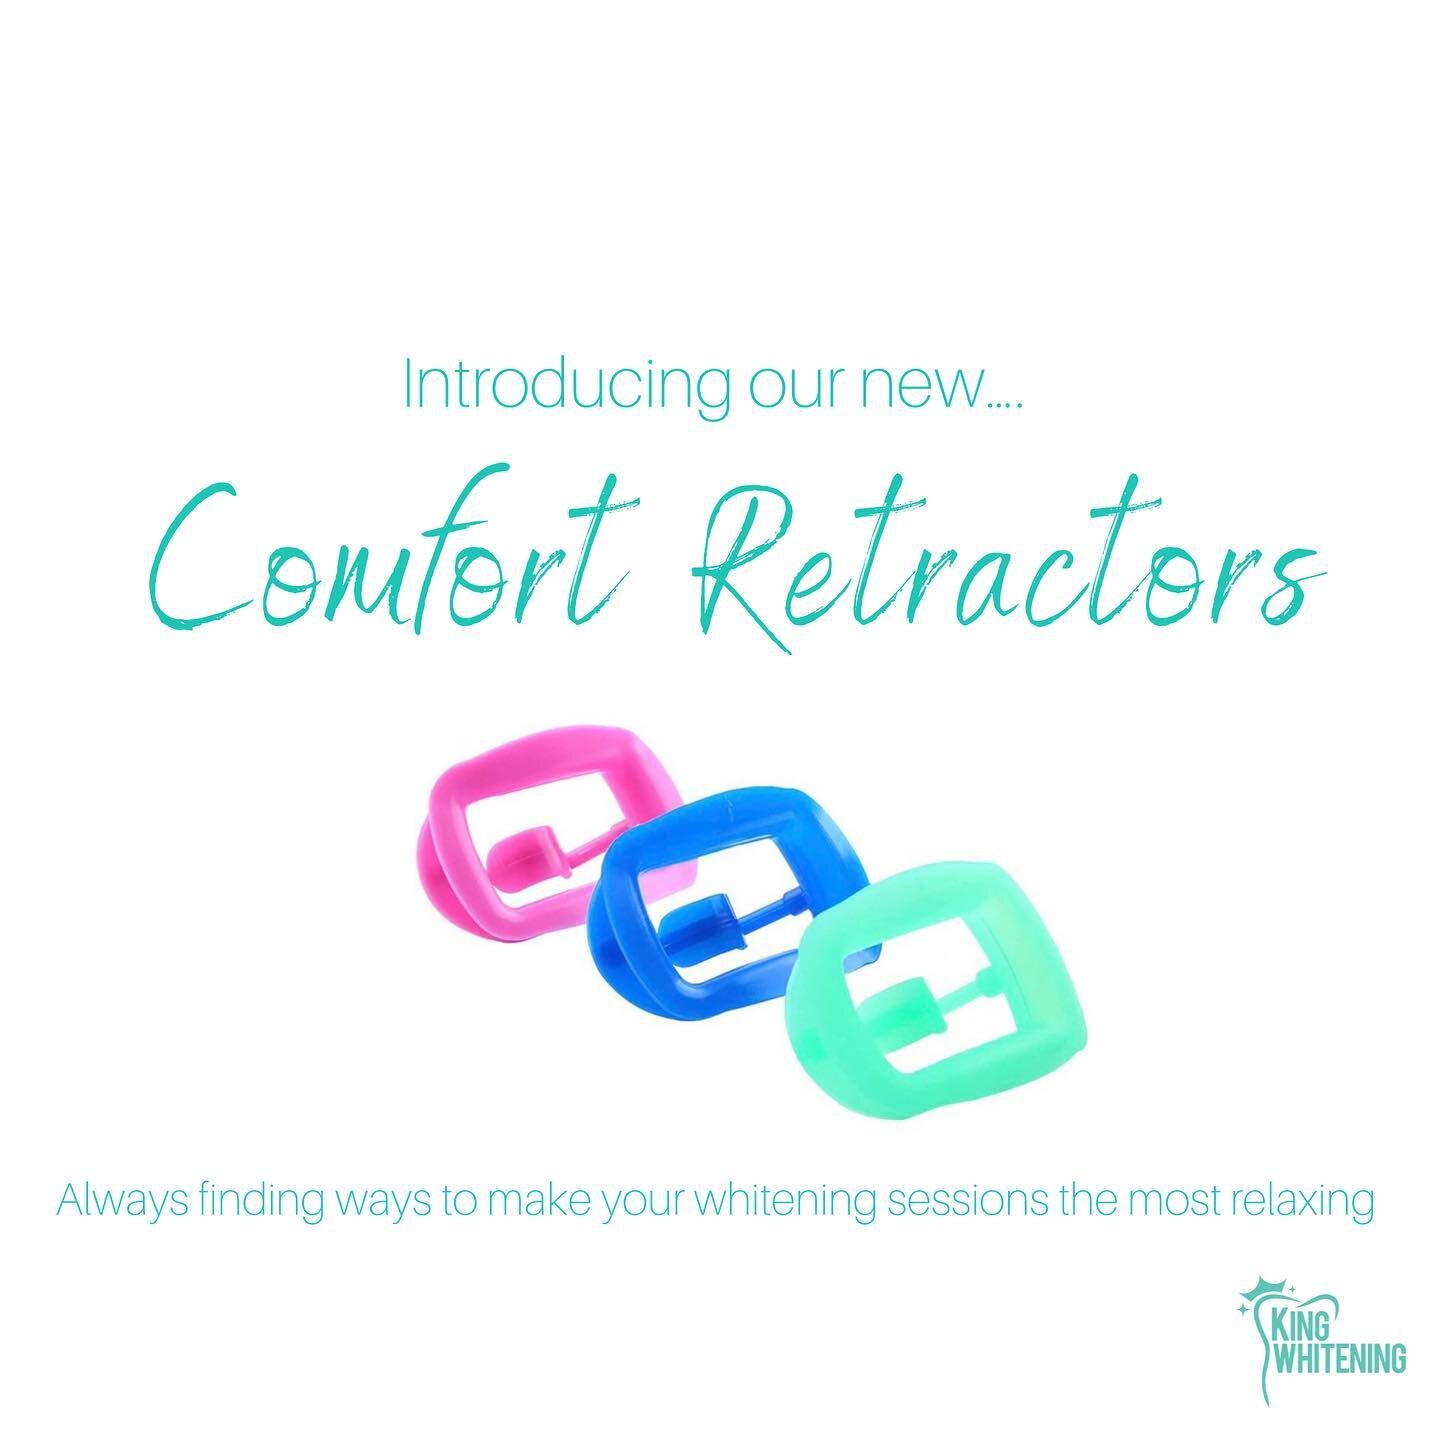 You talked &amp; we listened🗣

The only complaint has ever been that the mouth retractors aren&rsquo;t comfortable&hellip;

Well, there&rsquo;s no need to worry! Introducing our new comfort retractors! So comfy you&rsquo;ll hardly notice them🙌🏼

O